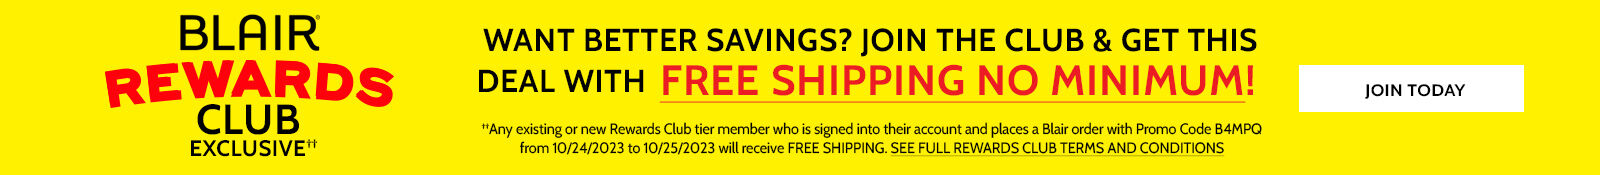 blair rewards club exclusive†† want better savings? join the club & get this deal with free shipping no minimum! join today ††any new or existing rewards club tier member who is signed into their account and places a Blair order with promo code B4LRQ from 10/19/23 to 10/23/23 will receive 40% off fleece, outerwear & sweaters and 30% off the rest of their purchase plus free shipping see full rewards terms & conditions